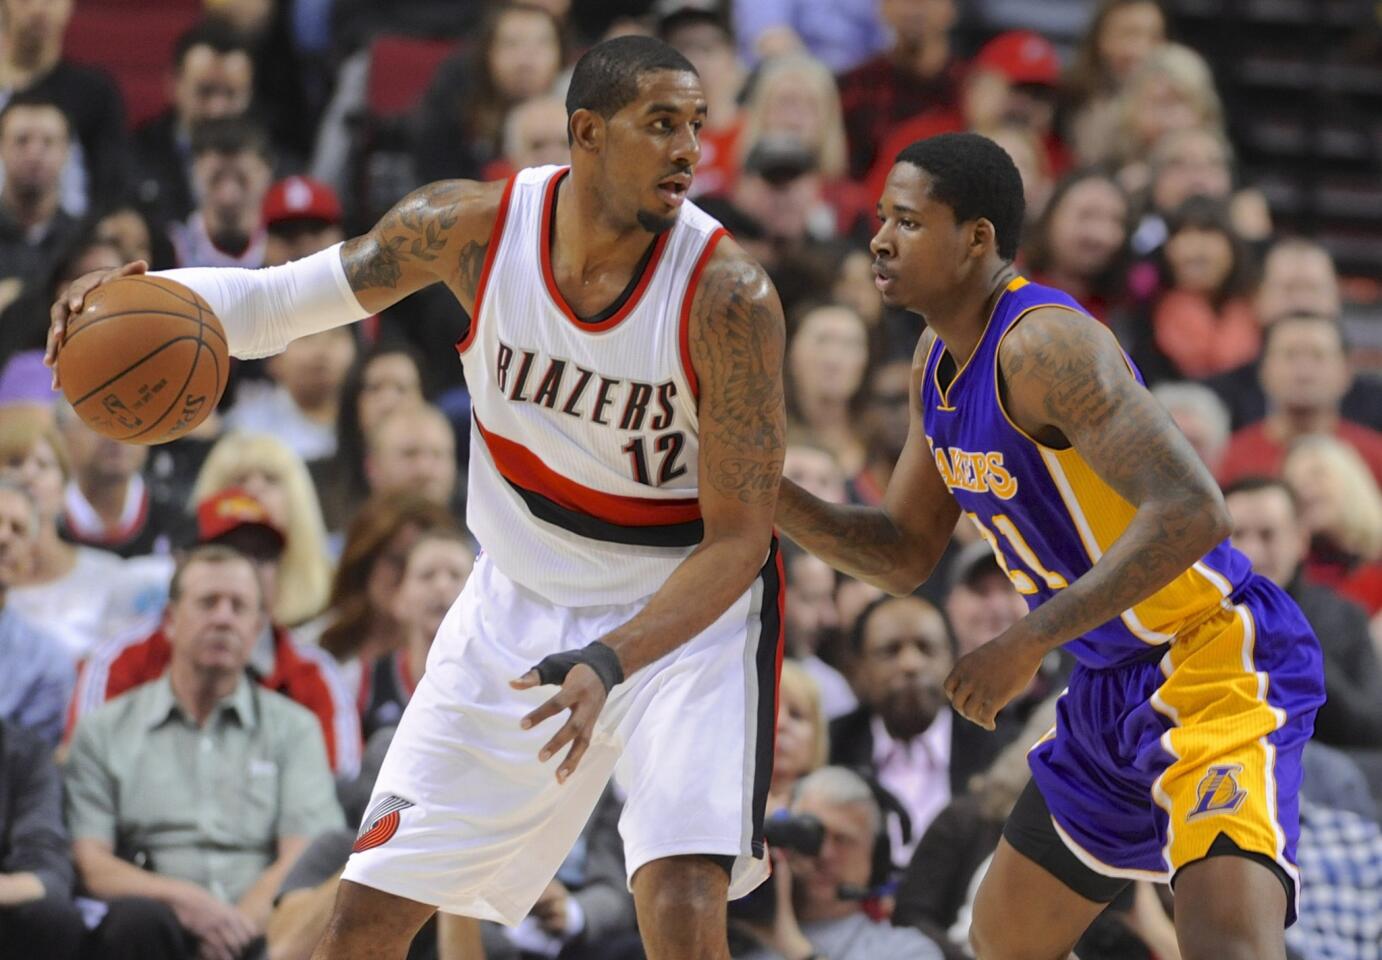 Trail Blazers forward LaMarcus Aldridge had 18 points with 12 rebounds in 28 minutes against the Lakers at Moda Center. Portland beat the Lakers, 102-86.